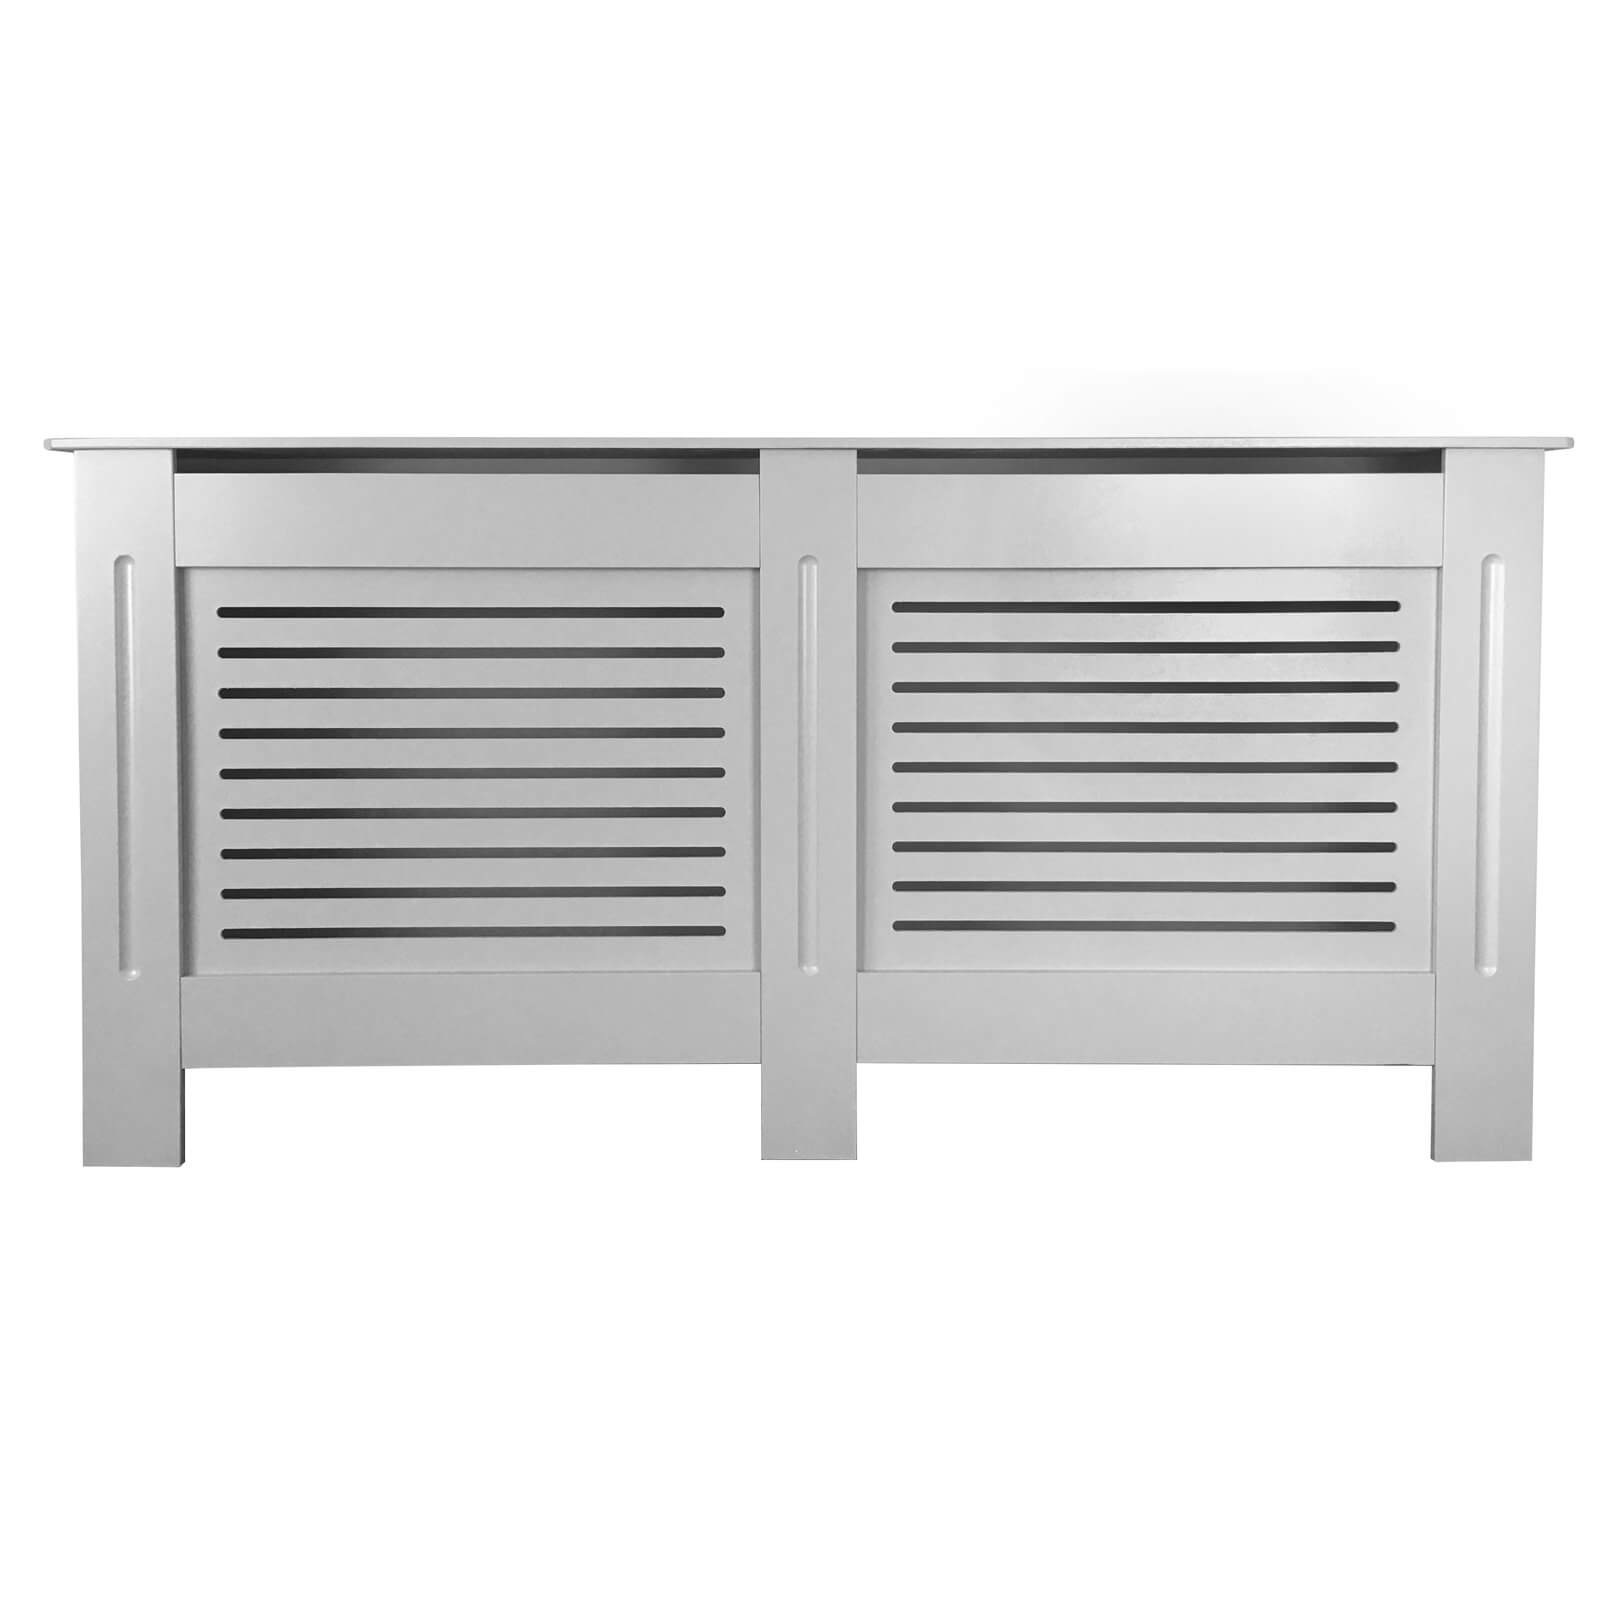 Radiator Cover with Horizontal Slatted Design in Grey - Extra Large